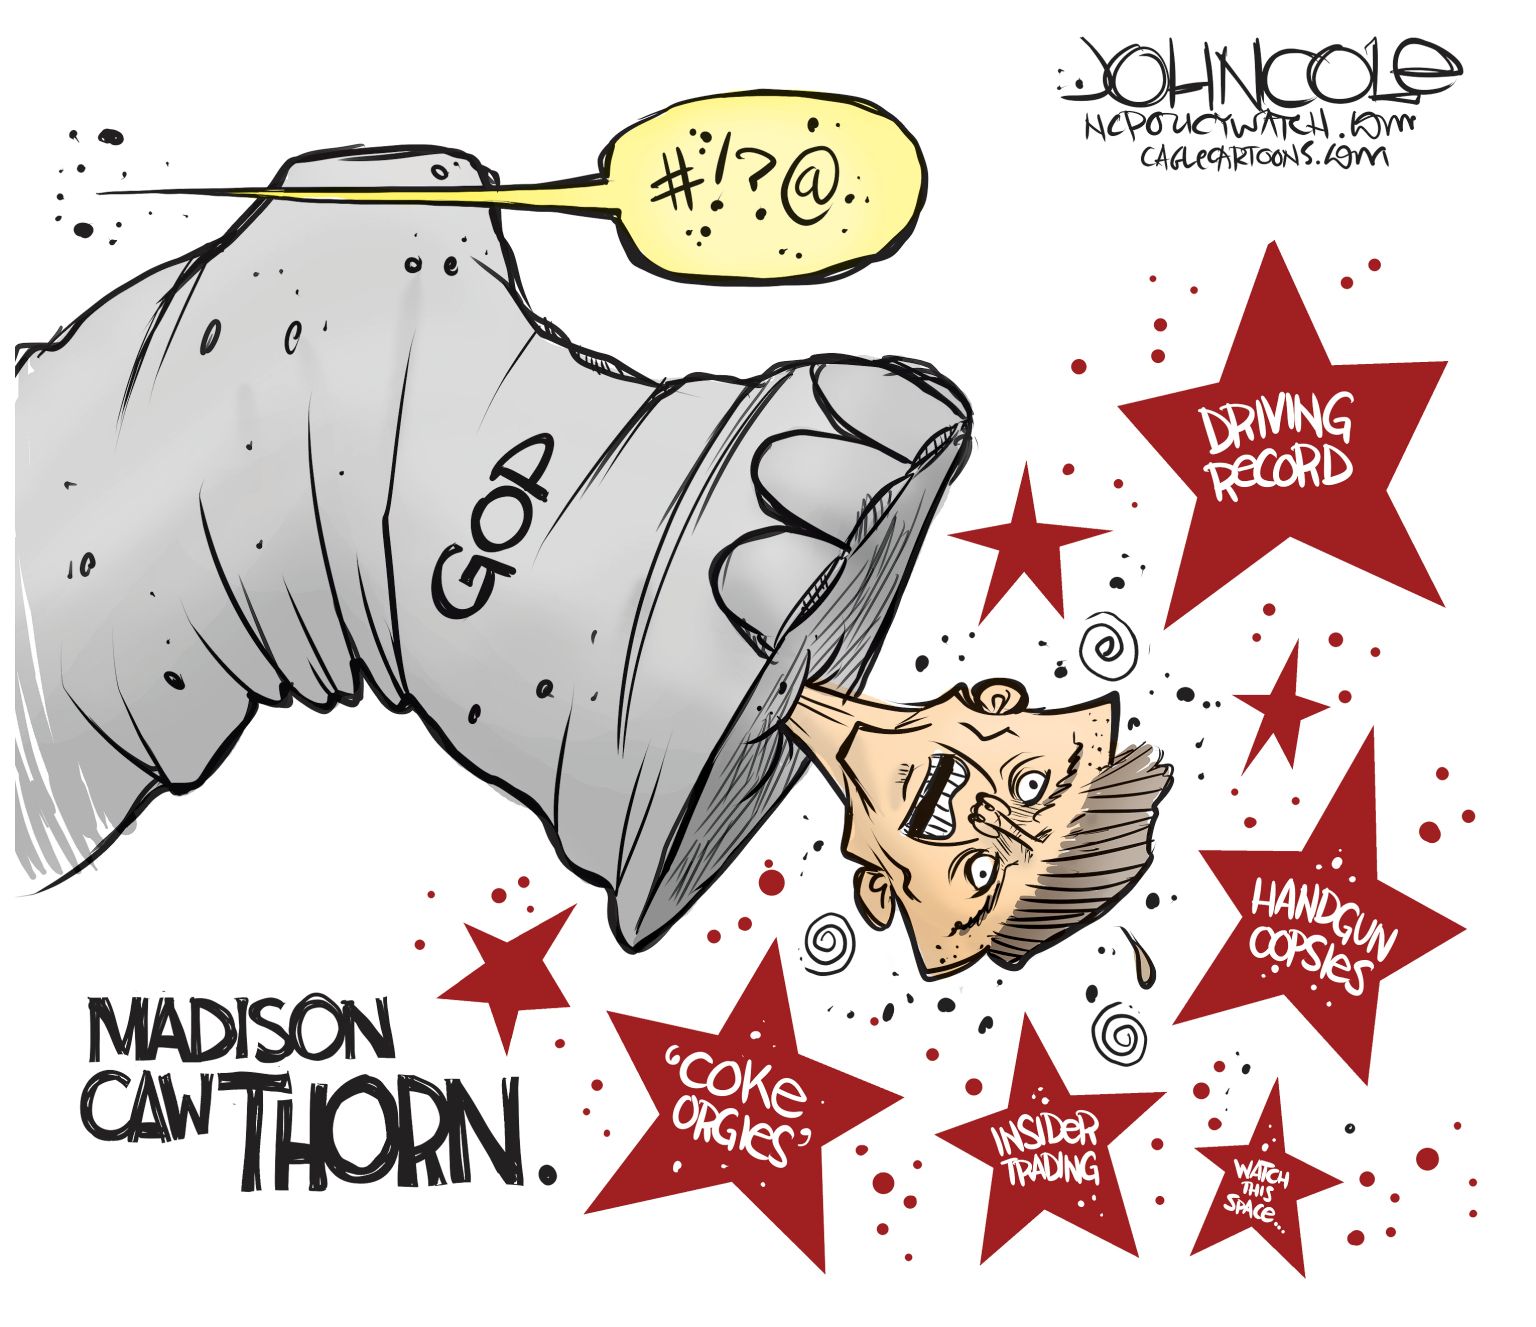 Madison Cawthorn has become a problem for Republicans